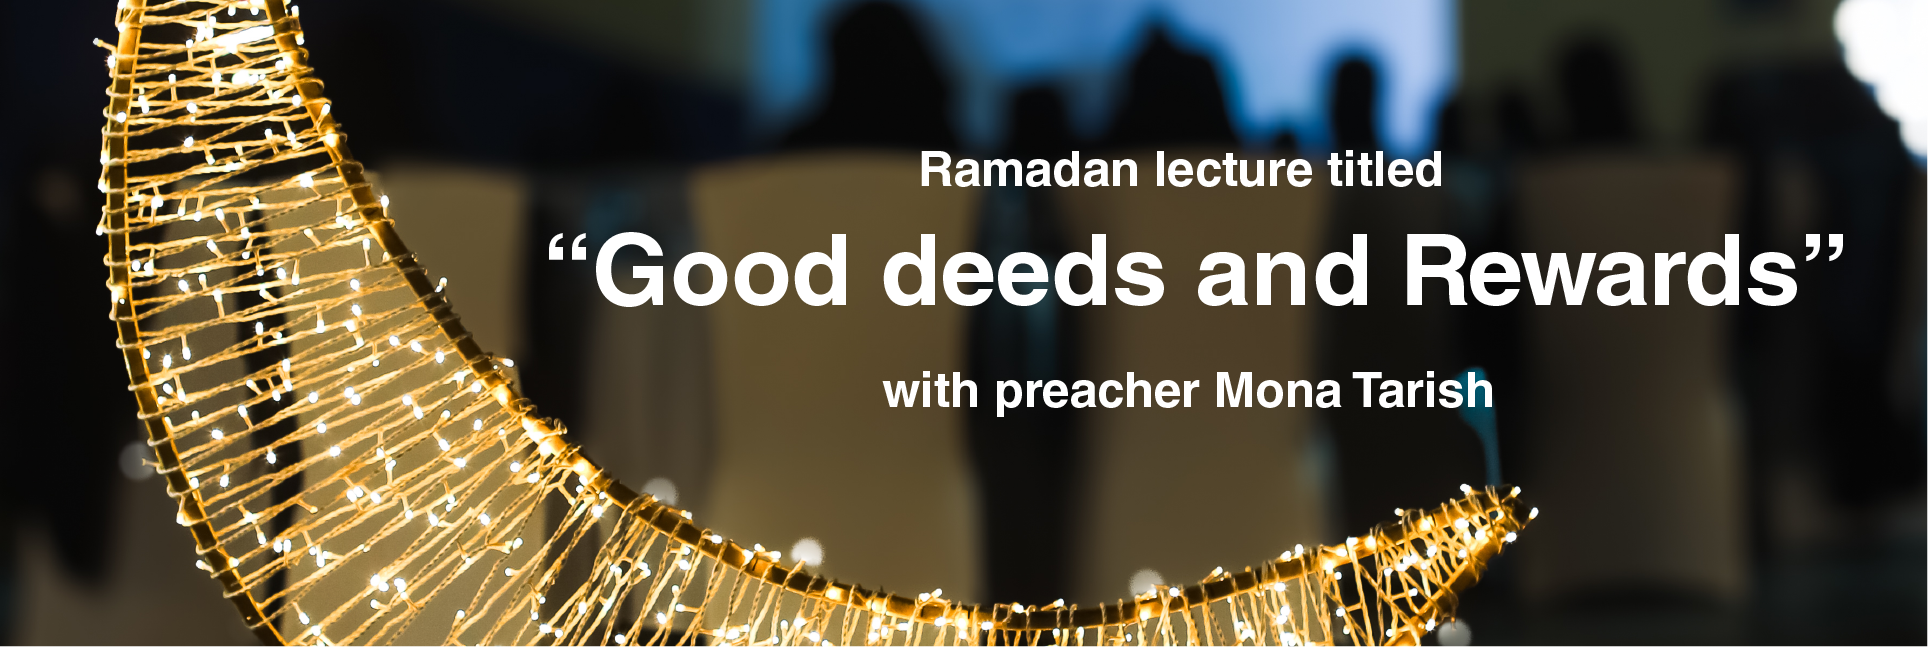 Ramadan-lecture-titled-“Good-deeds-and-Rewards”-(in-Arabic-language)